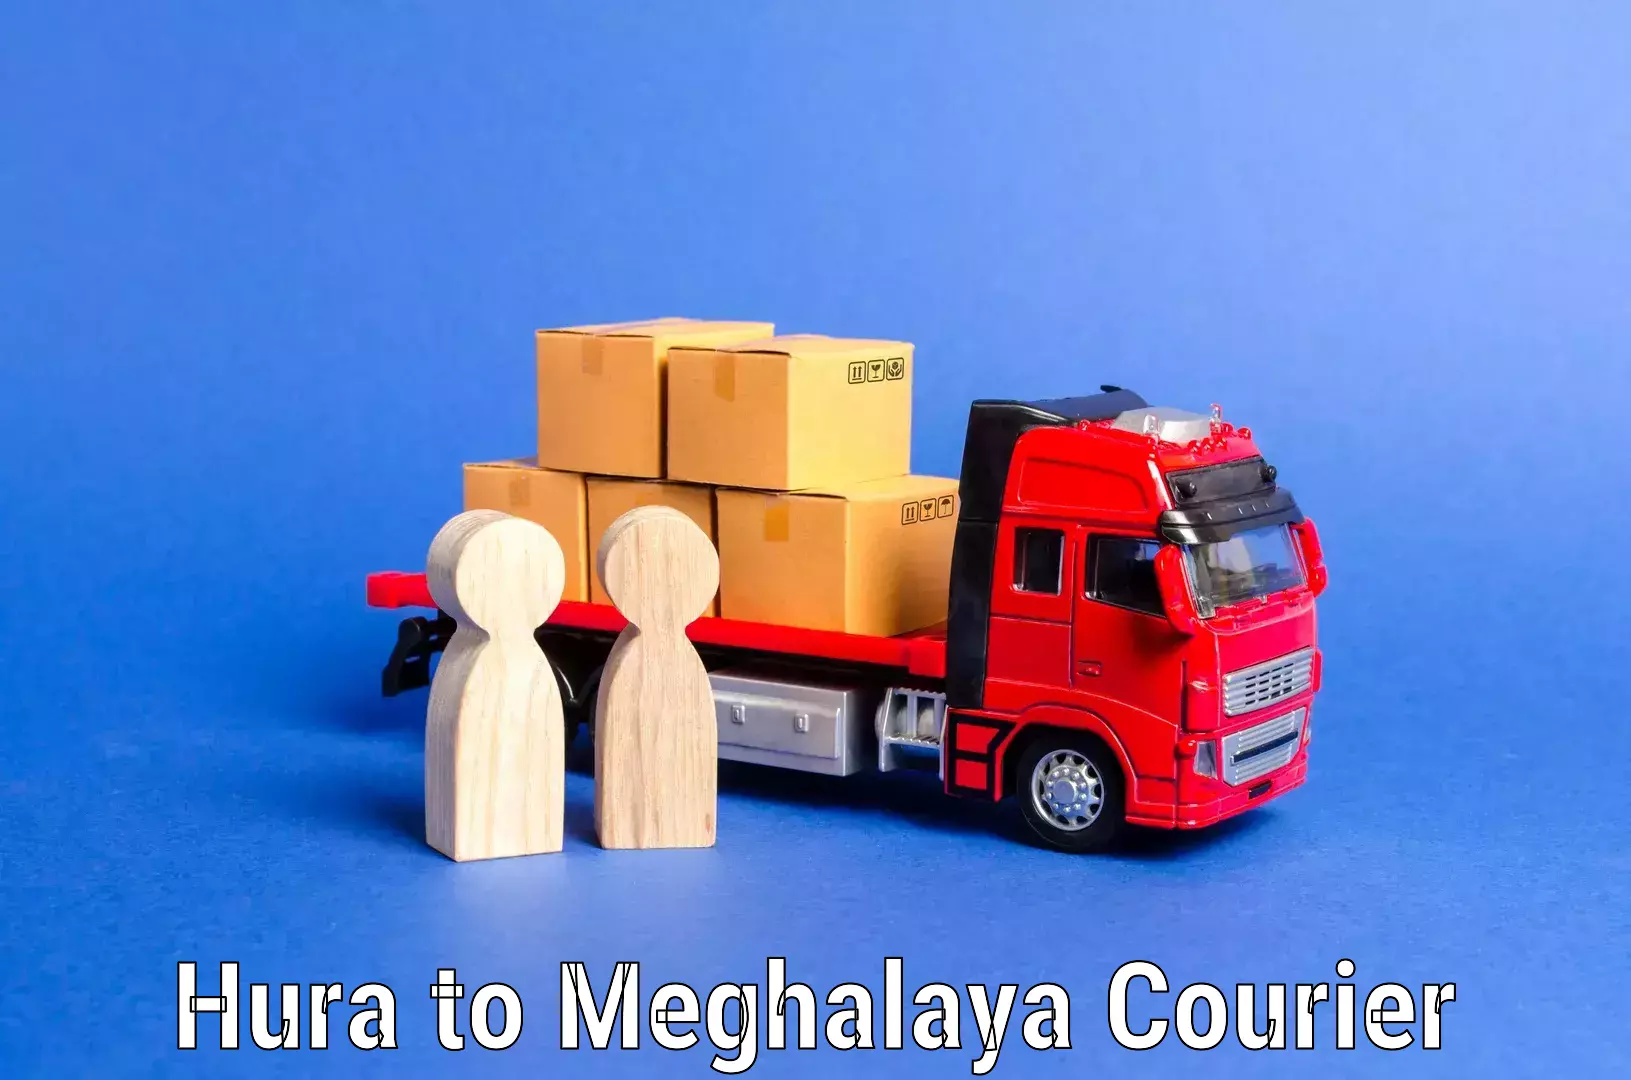 Furniture delivery service in Hura to Meghalaya